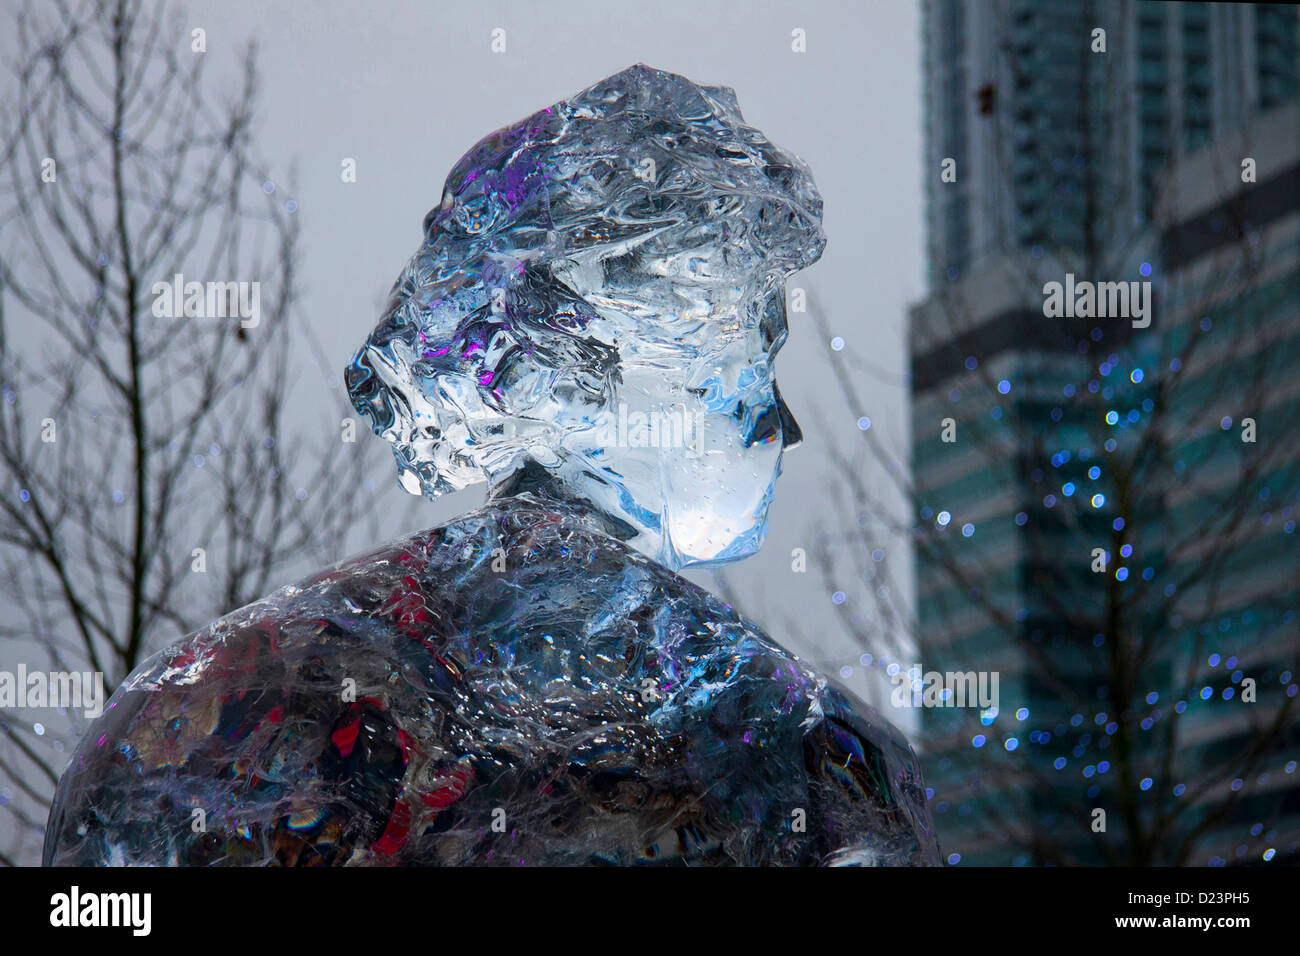 Carved ice sculpture of woman at Canary Wharf Ice Festival, London Stock Photo